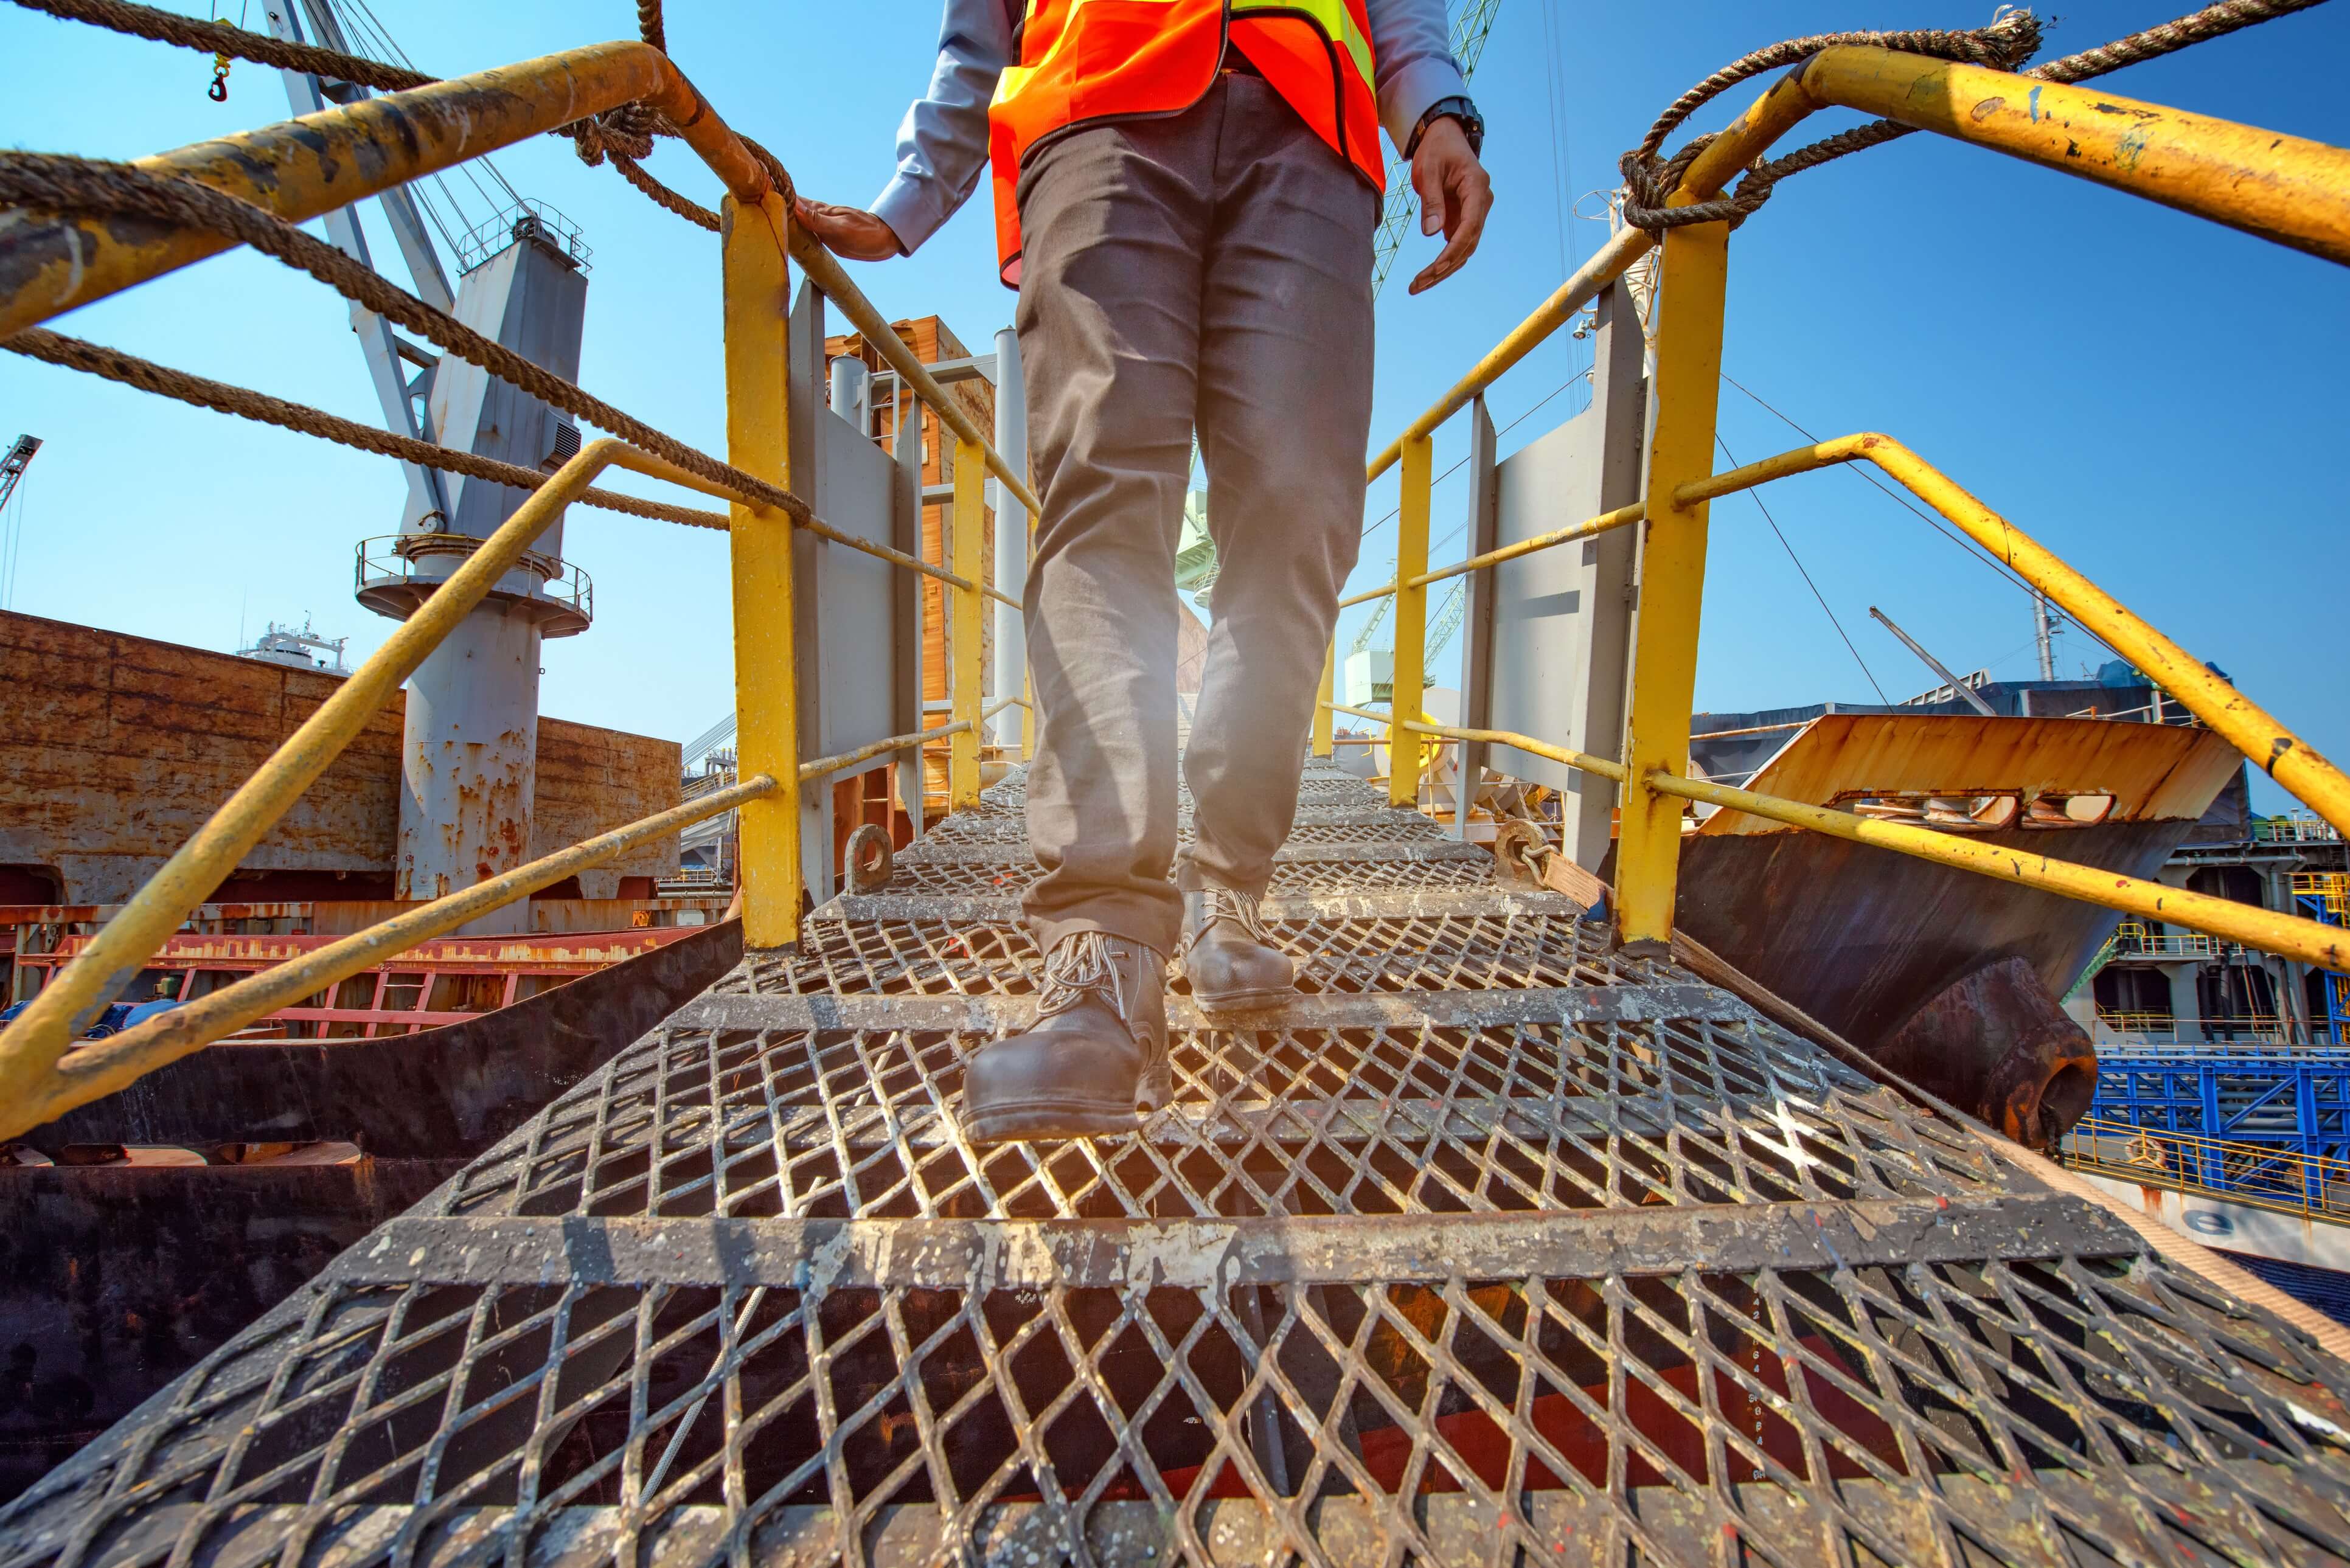 What Are the Rules Around Fall Protection Equipment Inspections?